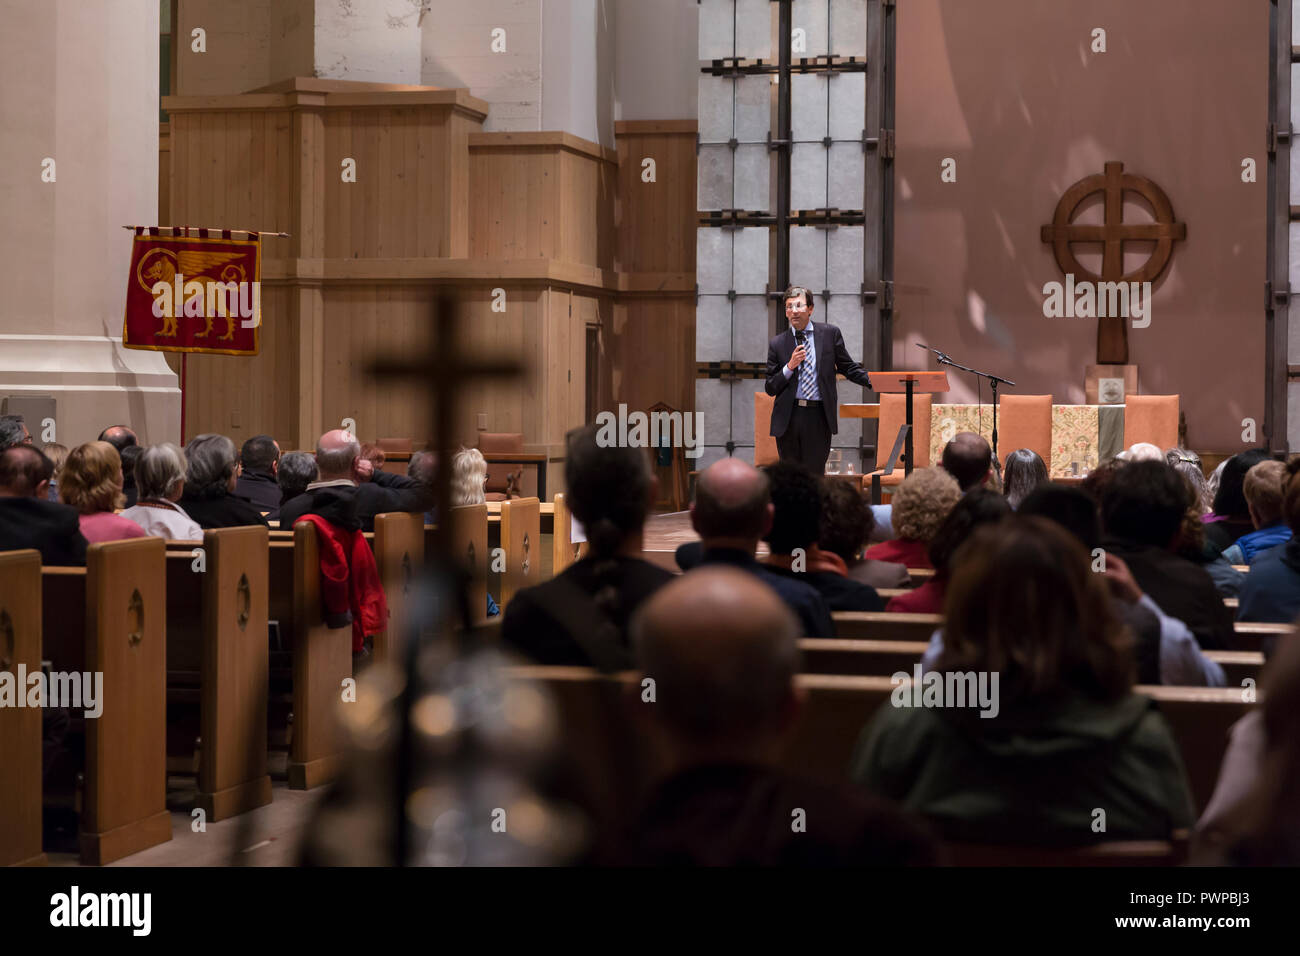 Seattle, Washington DC, USA. 17th Oct 2018. Attorney General Bob Ferguson speaks to supporters at St. Mark's Episcopal Cathedral during a discussion on the current state immigration. “Immigration Reform in Washington State” was hosted by St. Mark's Episcopal Cathedral and included a panel with representatives from Casa Latina, El Centro de la Raza and the Church Council of Greater Seattle. Credit: Paul Christian Gordon/Alamy Live News Stock Photo